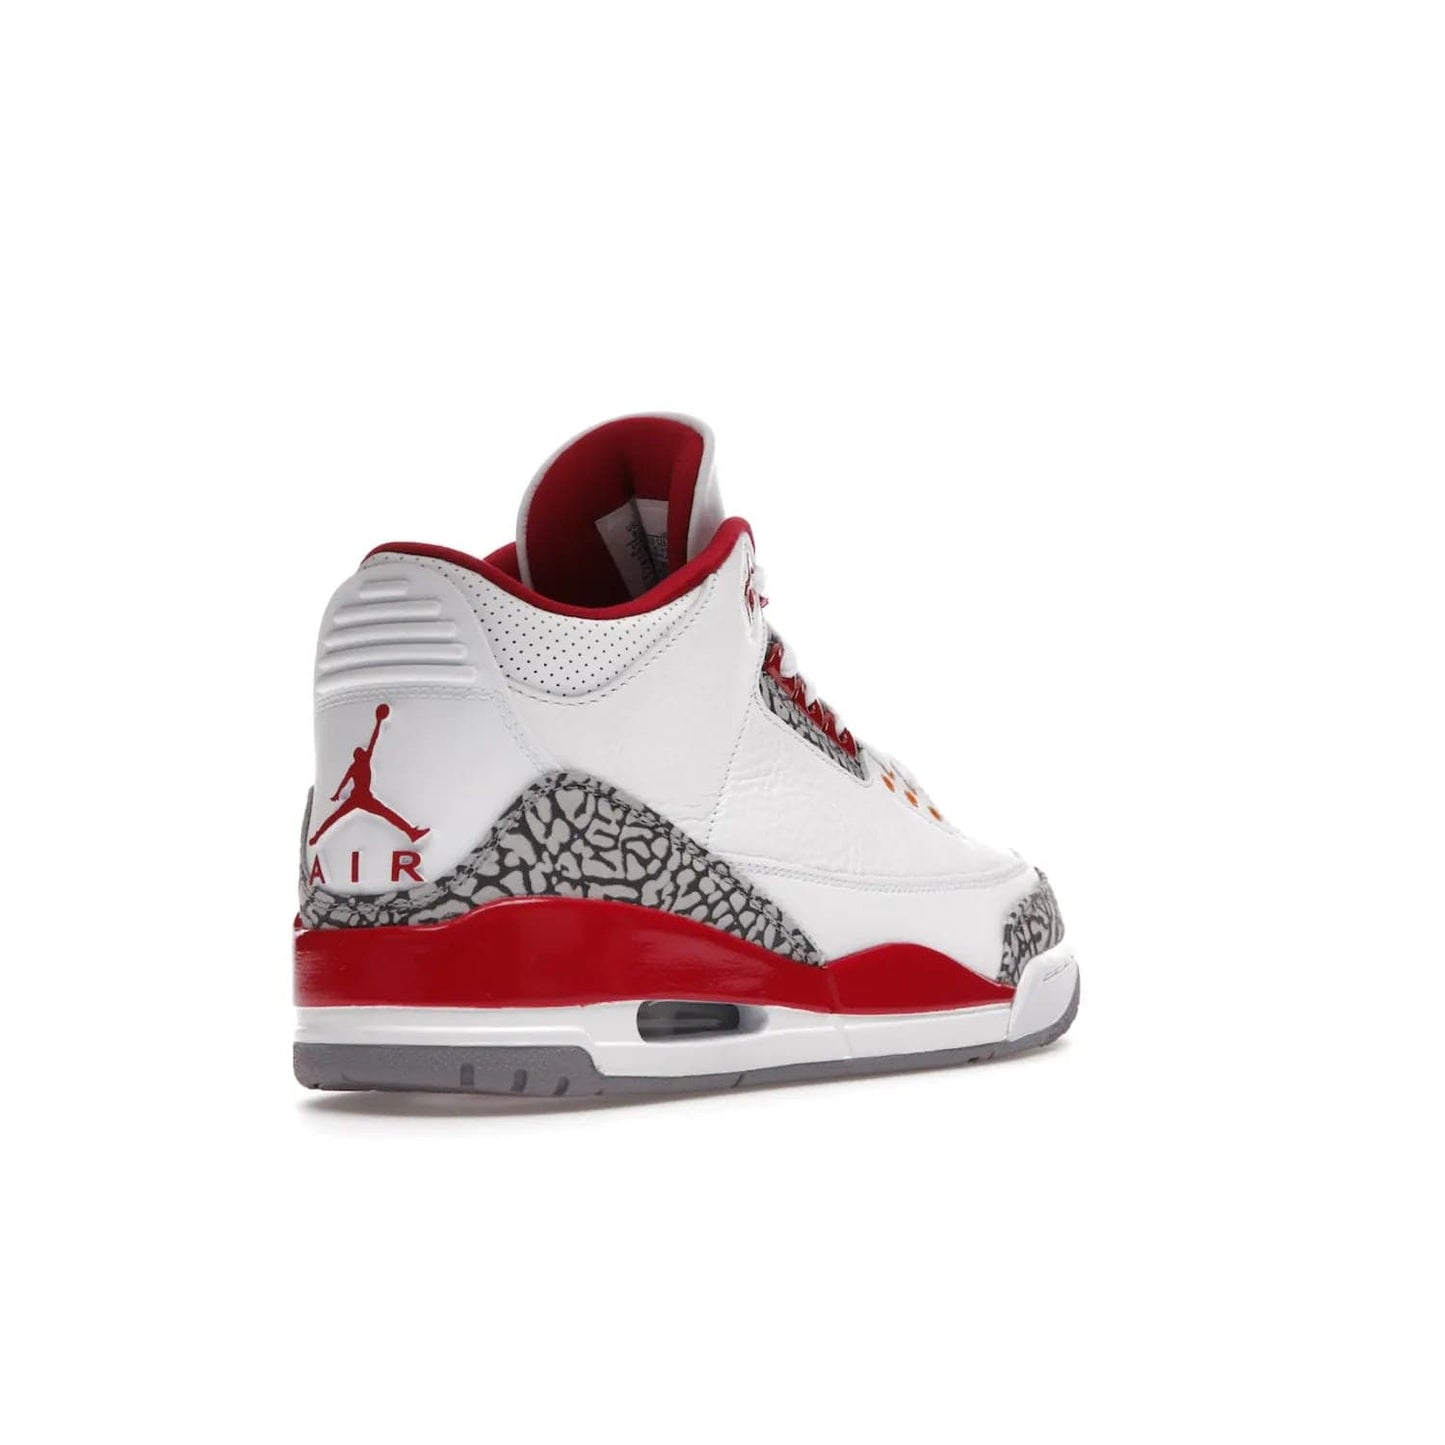 Jordan 3 Retro Cardinal Red - Image 32 - Only at www.BallersClubKickz.com - Air Jordan 3 Retro Cardinal Red combines classic style and modern appeal - white tumbled leather, signature Elephant Print overlays, cardinal red midsoles, Jumpman logo embroidery. Available Feb 2022.